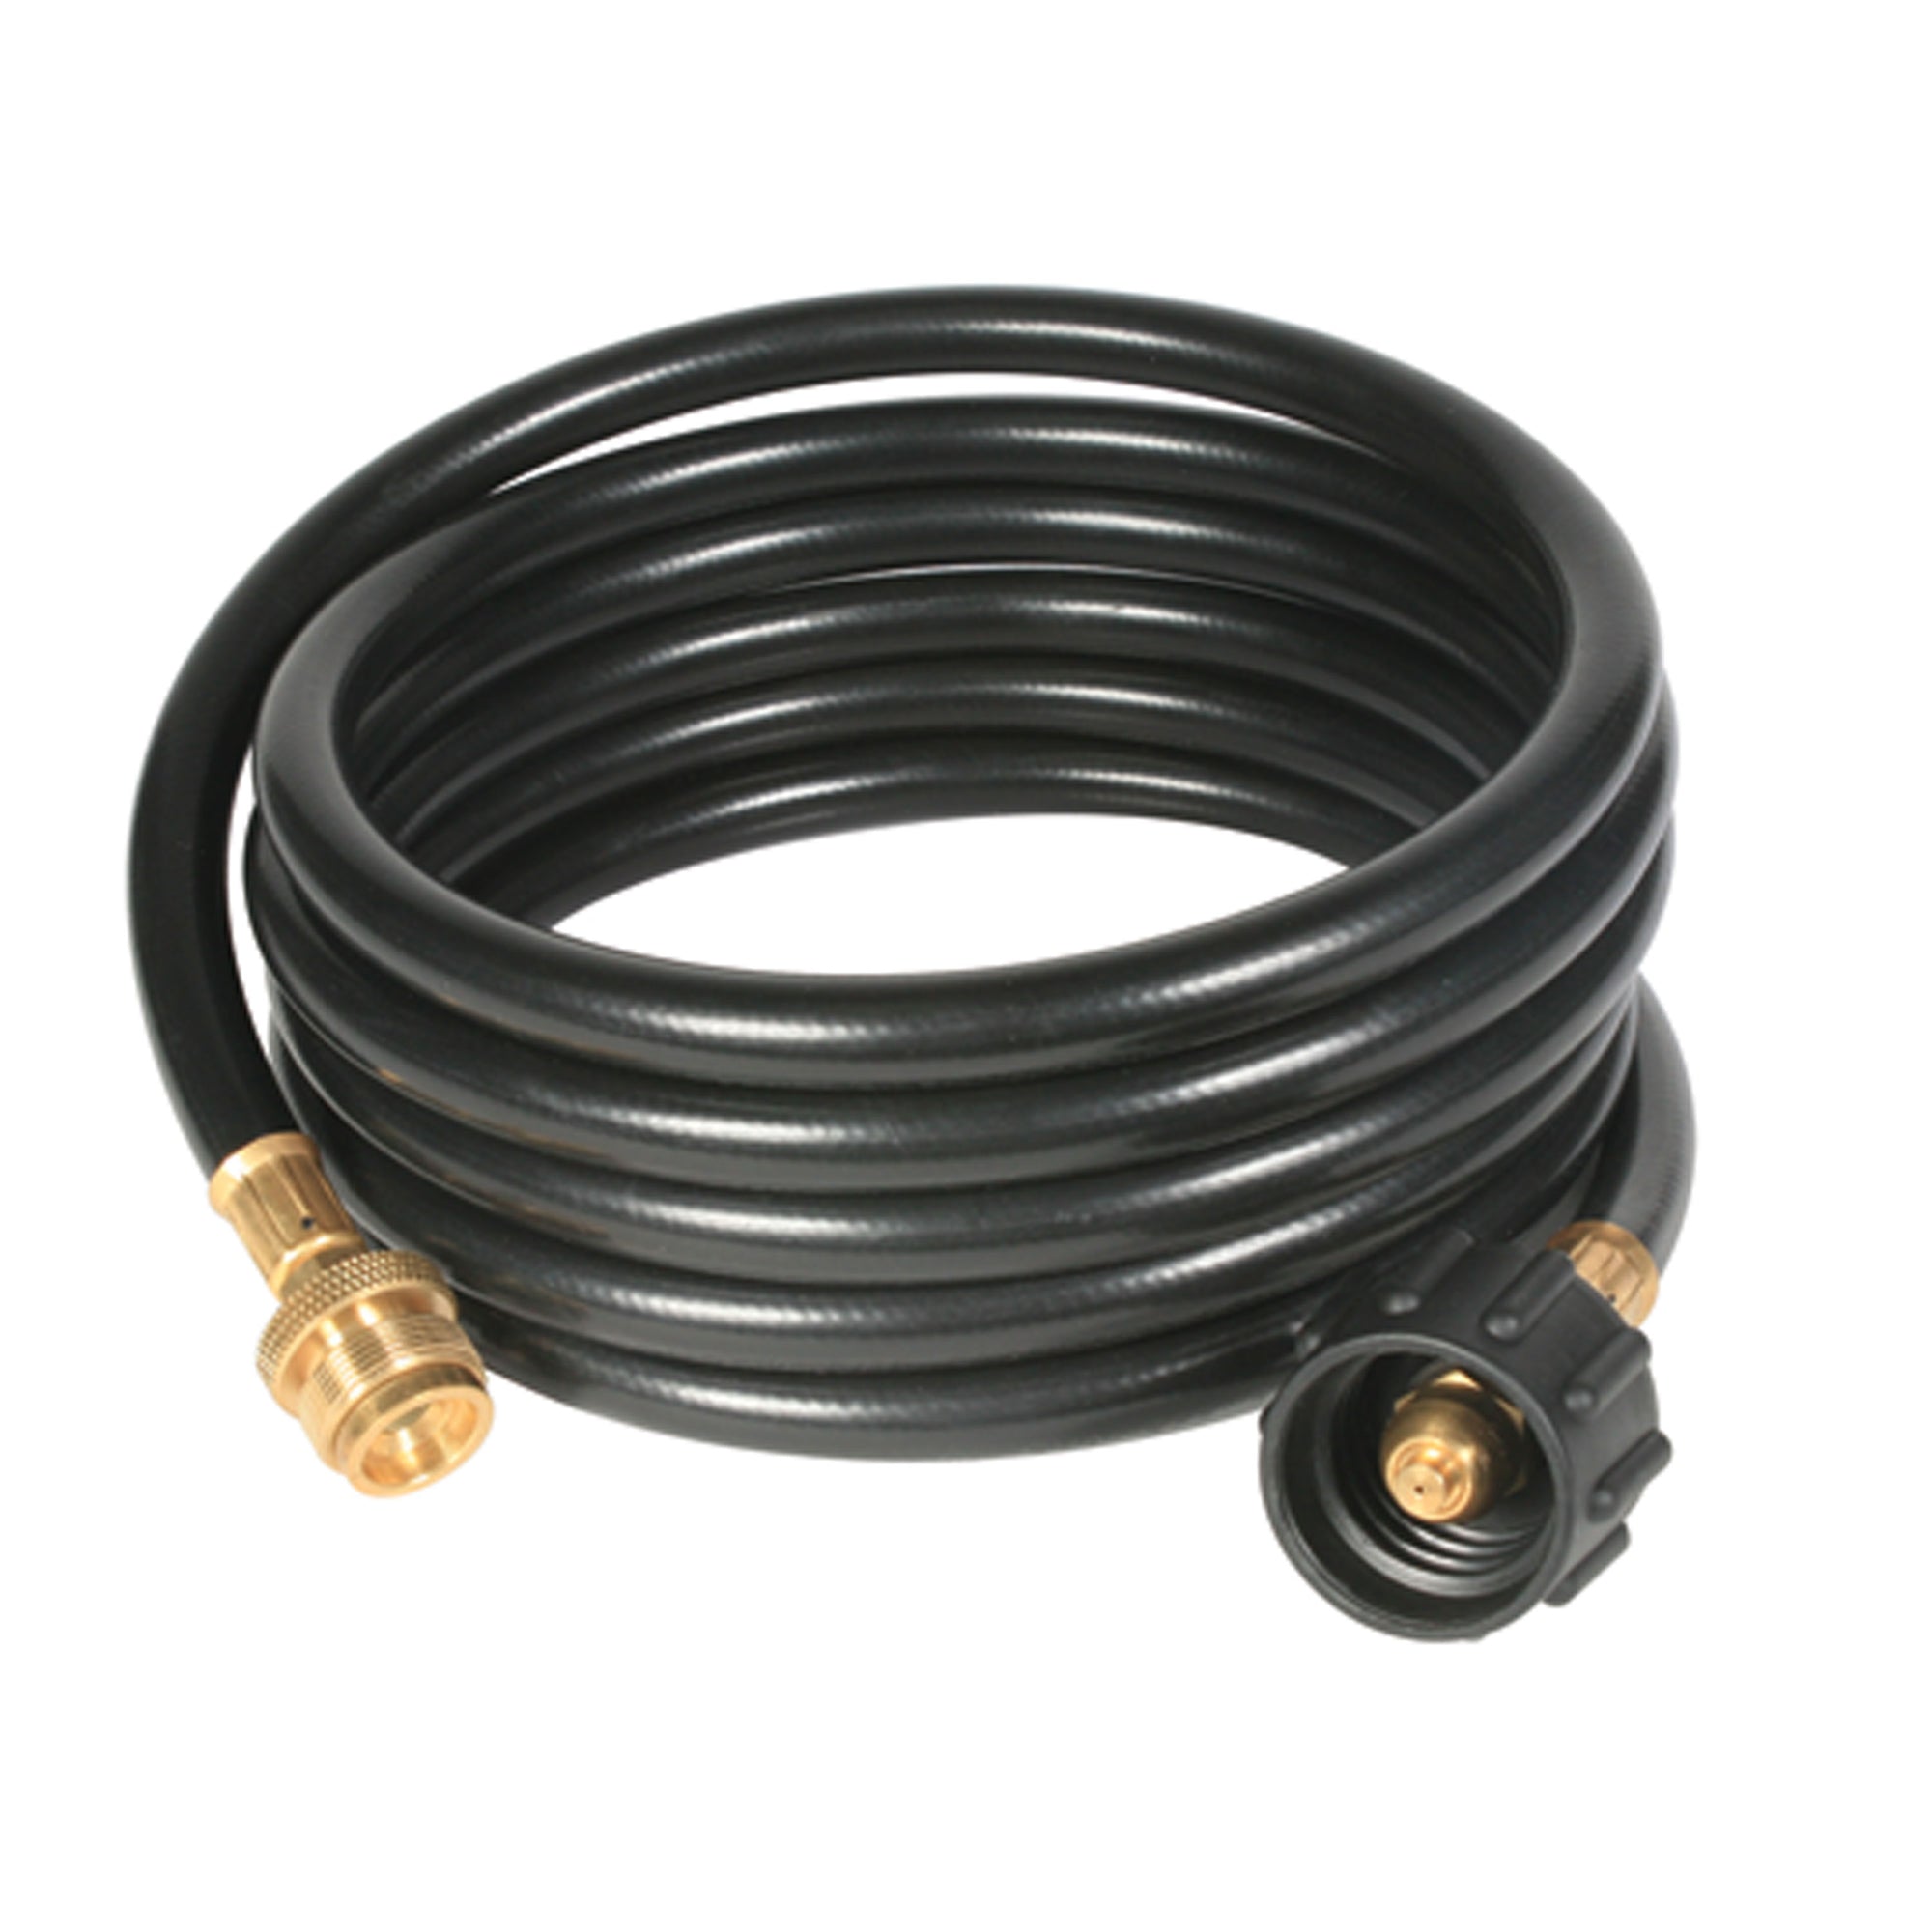 Camco 59825 12' x 1" Male LP Hose Assembly